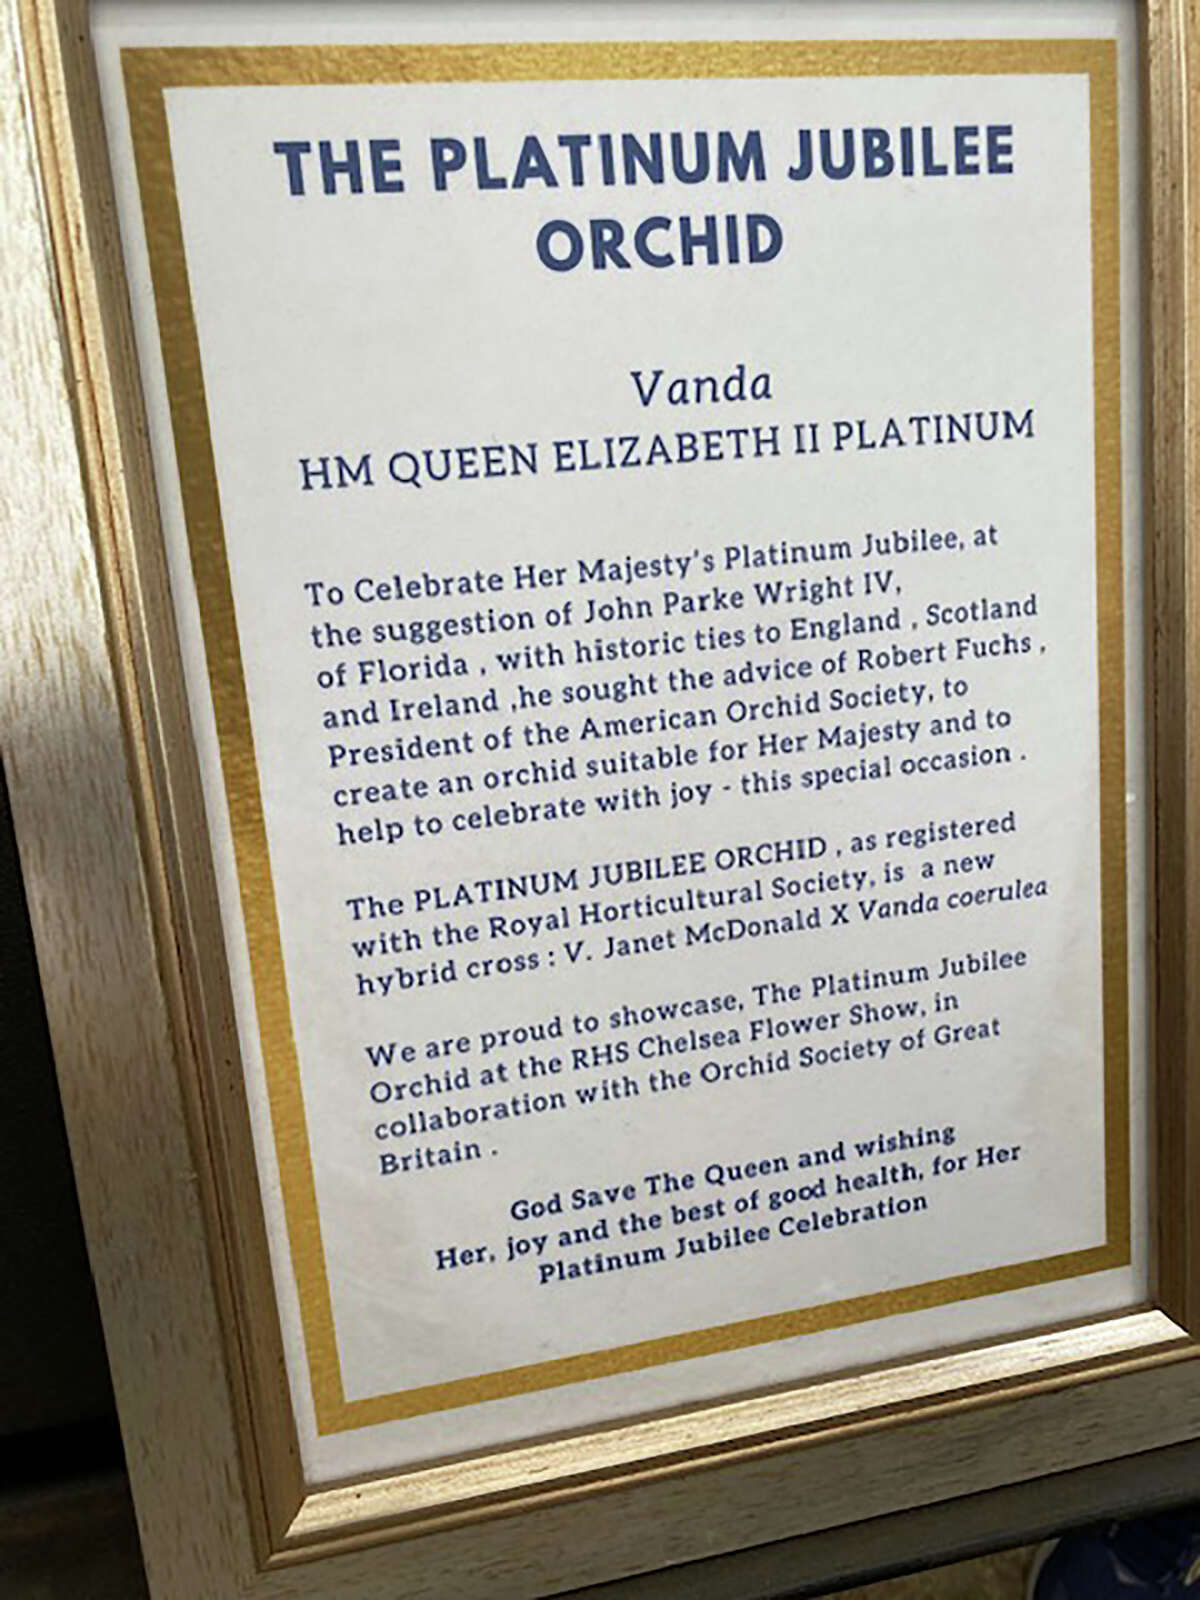 A sign at the Royal Horticultural Society's 2022 Chelsea Flower Show in London gives the details of the Platinum Jubilee Orchid.